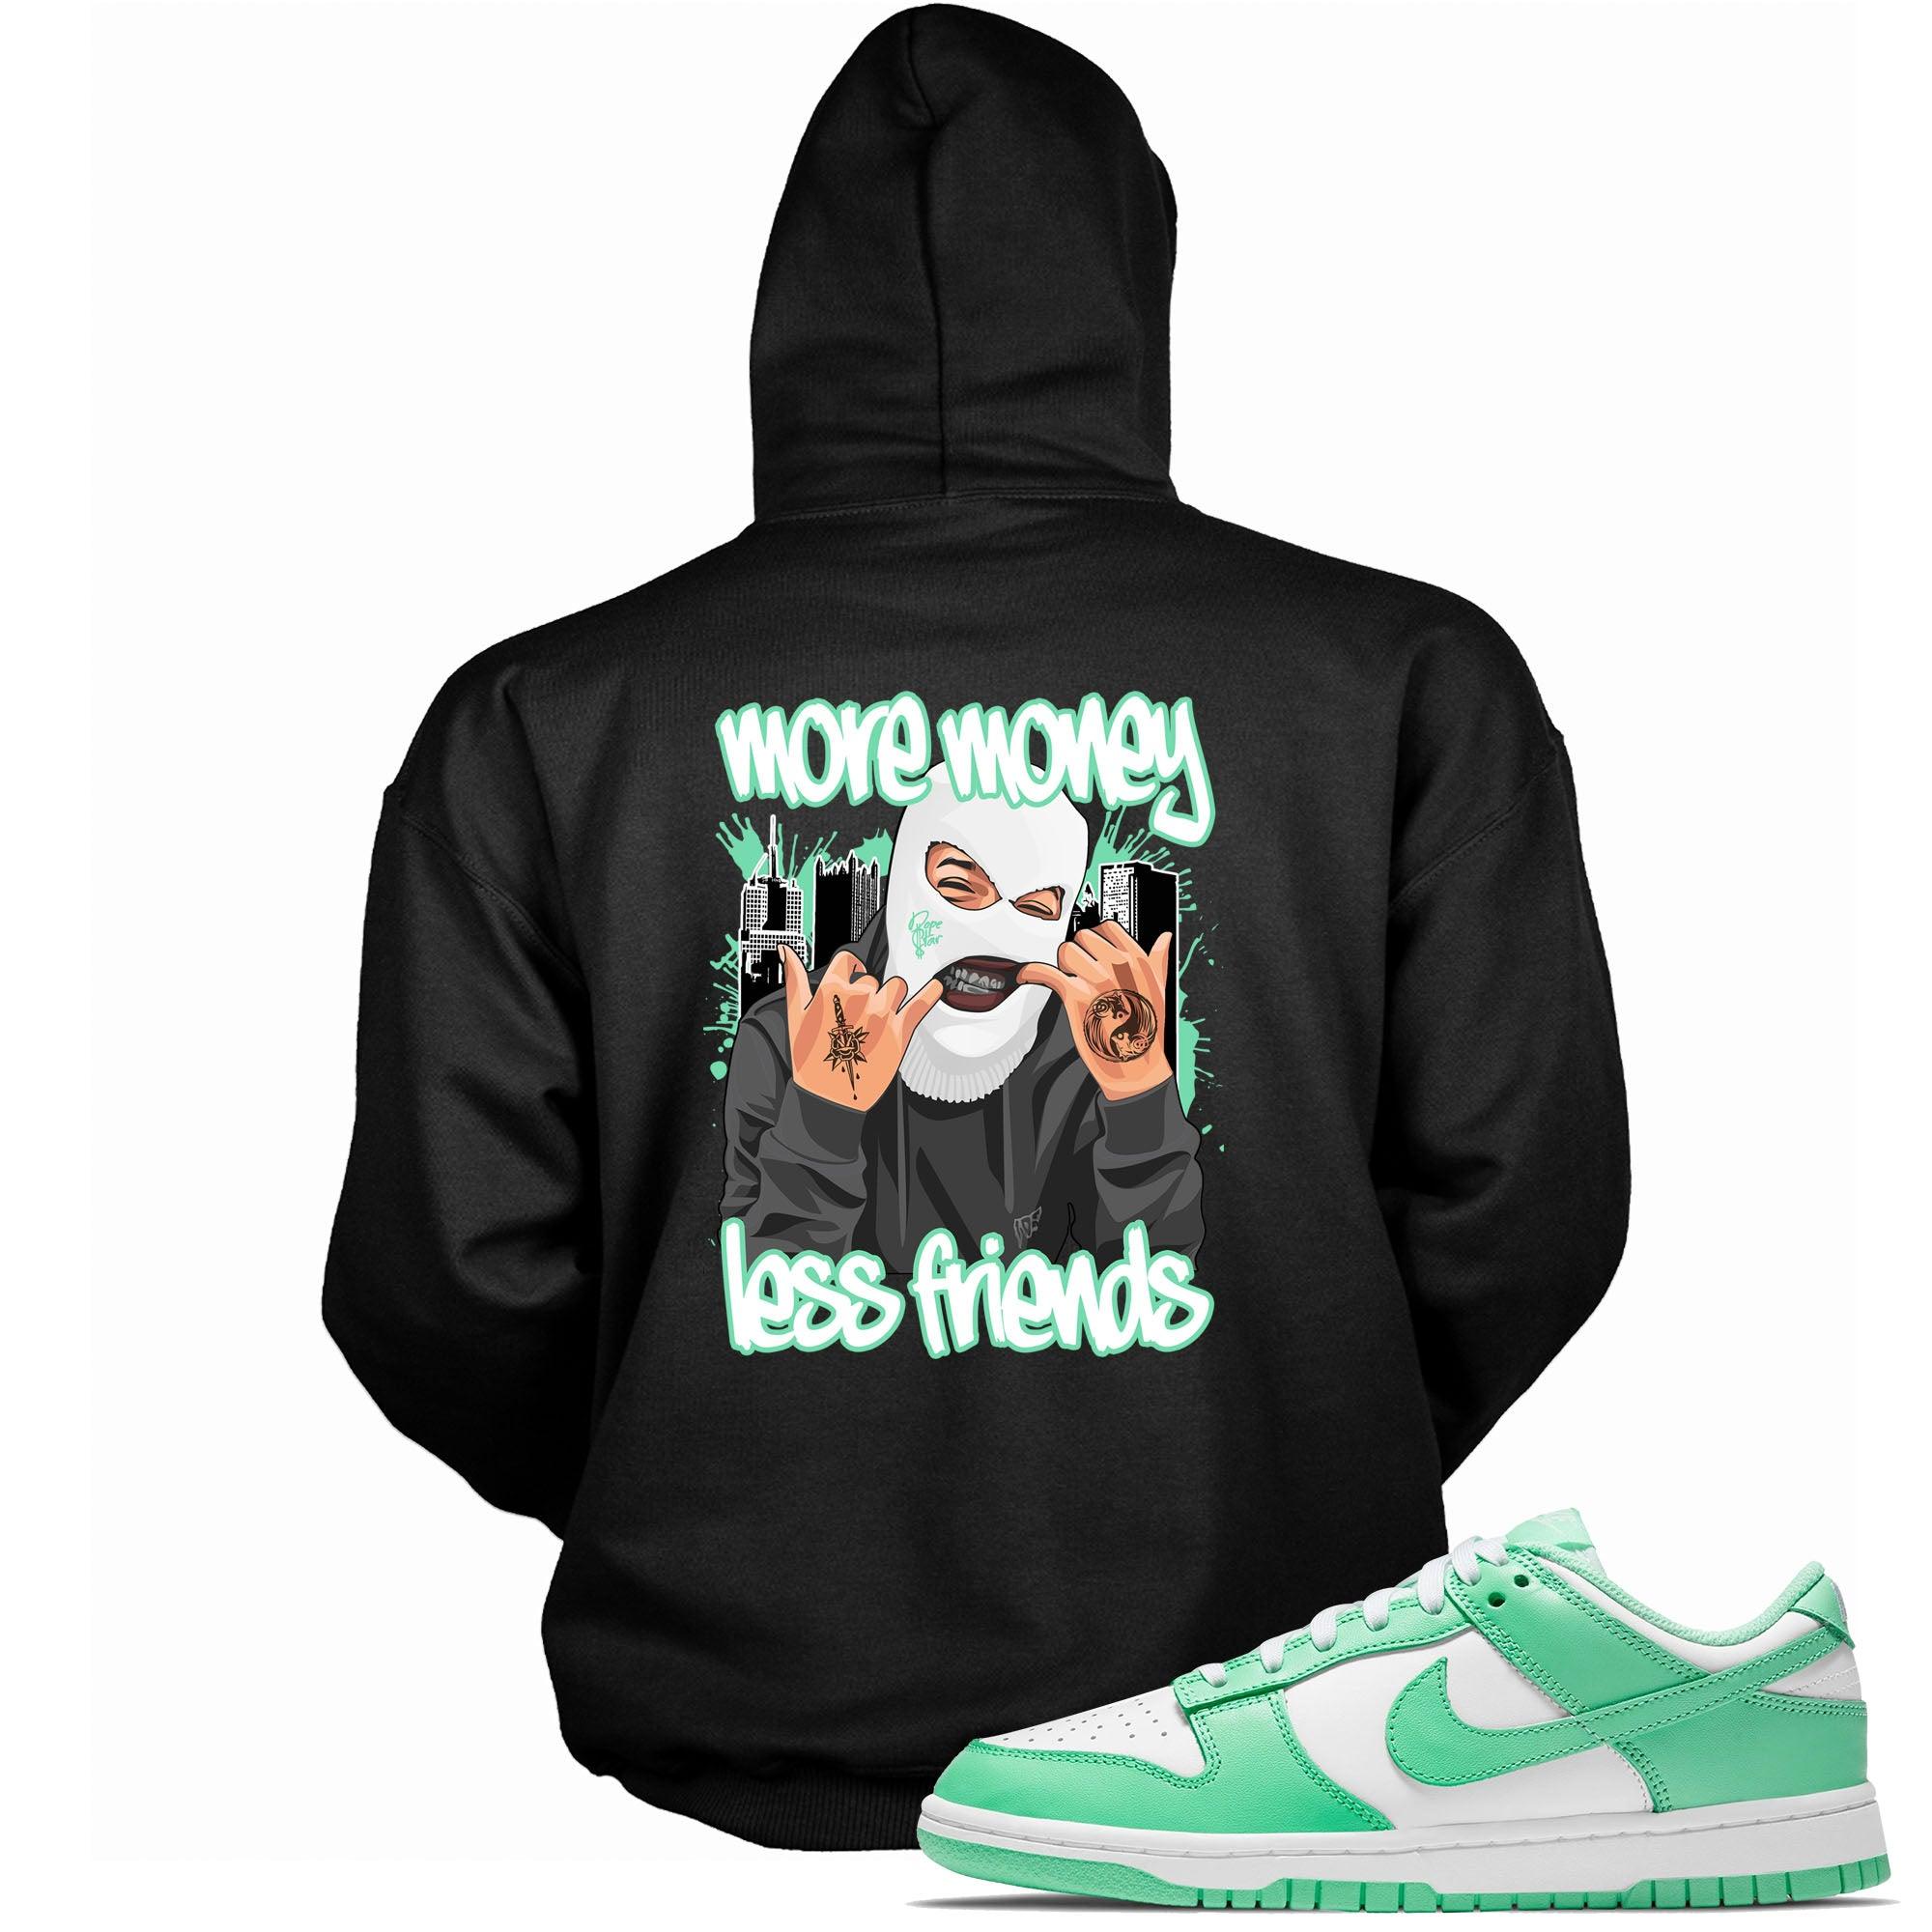 More Money Less Friends Hoodie Nike Dunk Low Green Glow photo